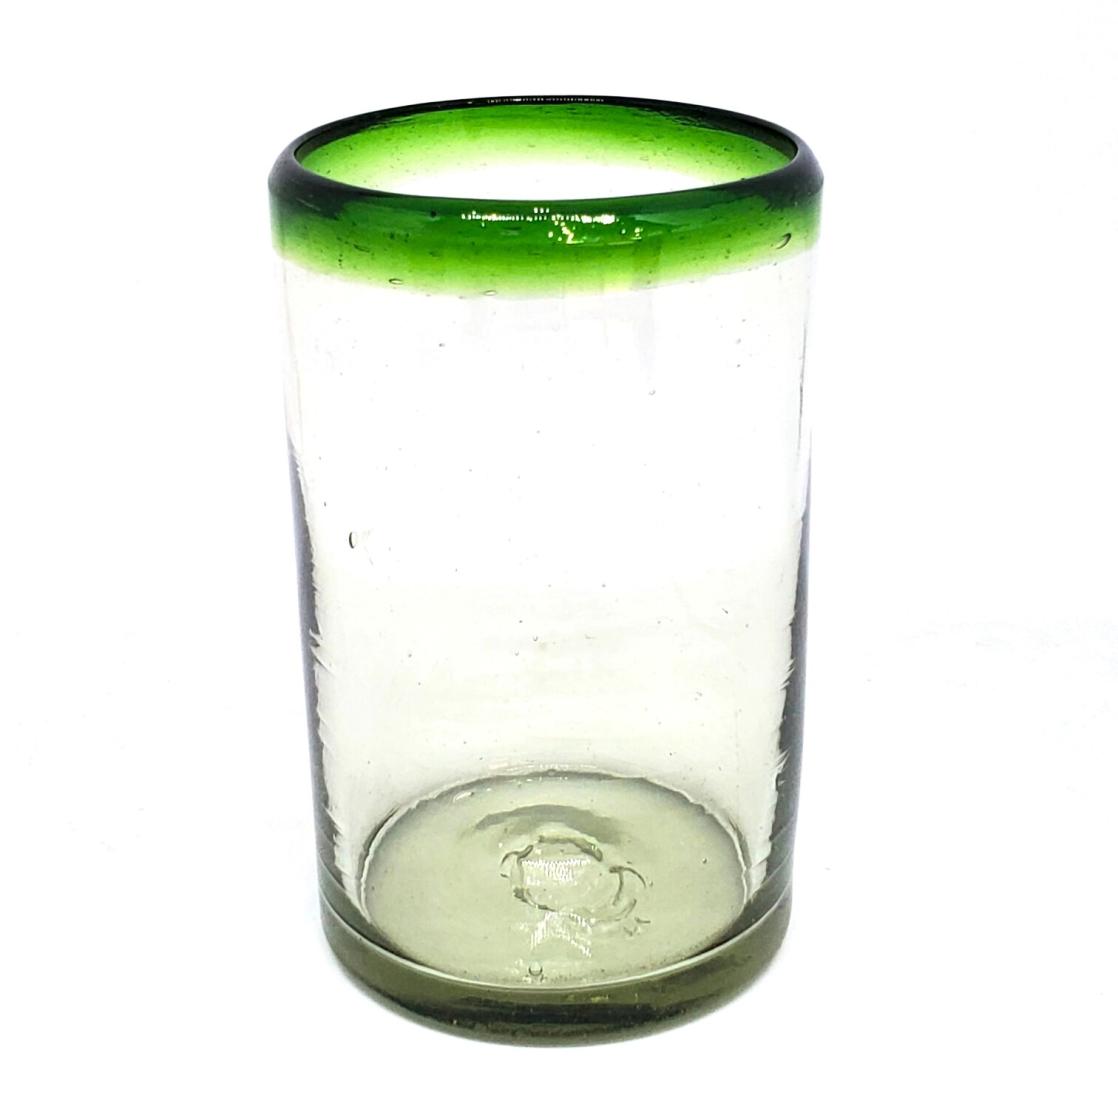 Mexican Glasses / Emerald Green Rim 14 oz Drinking Glasses (set of 6) / These handcrafted glasses deliver a classic touch to your favorite drink.